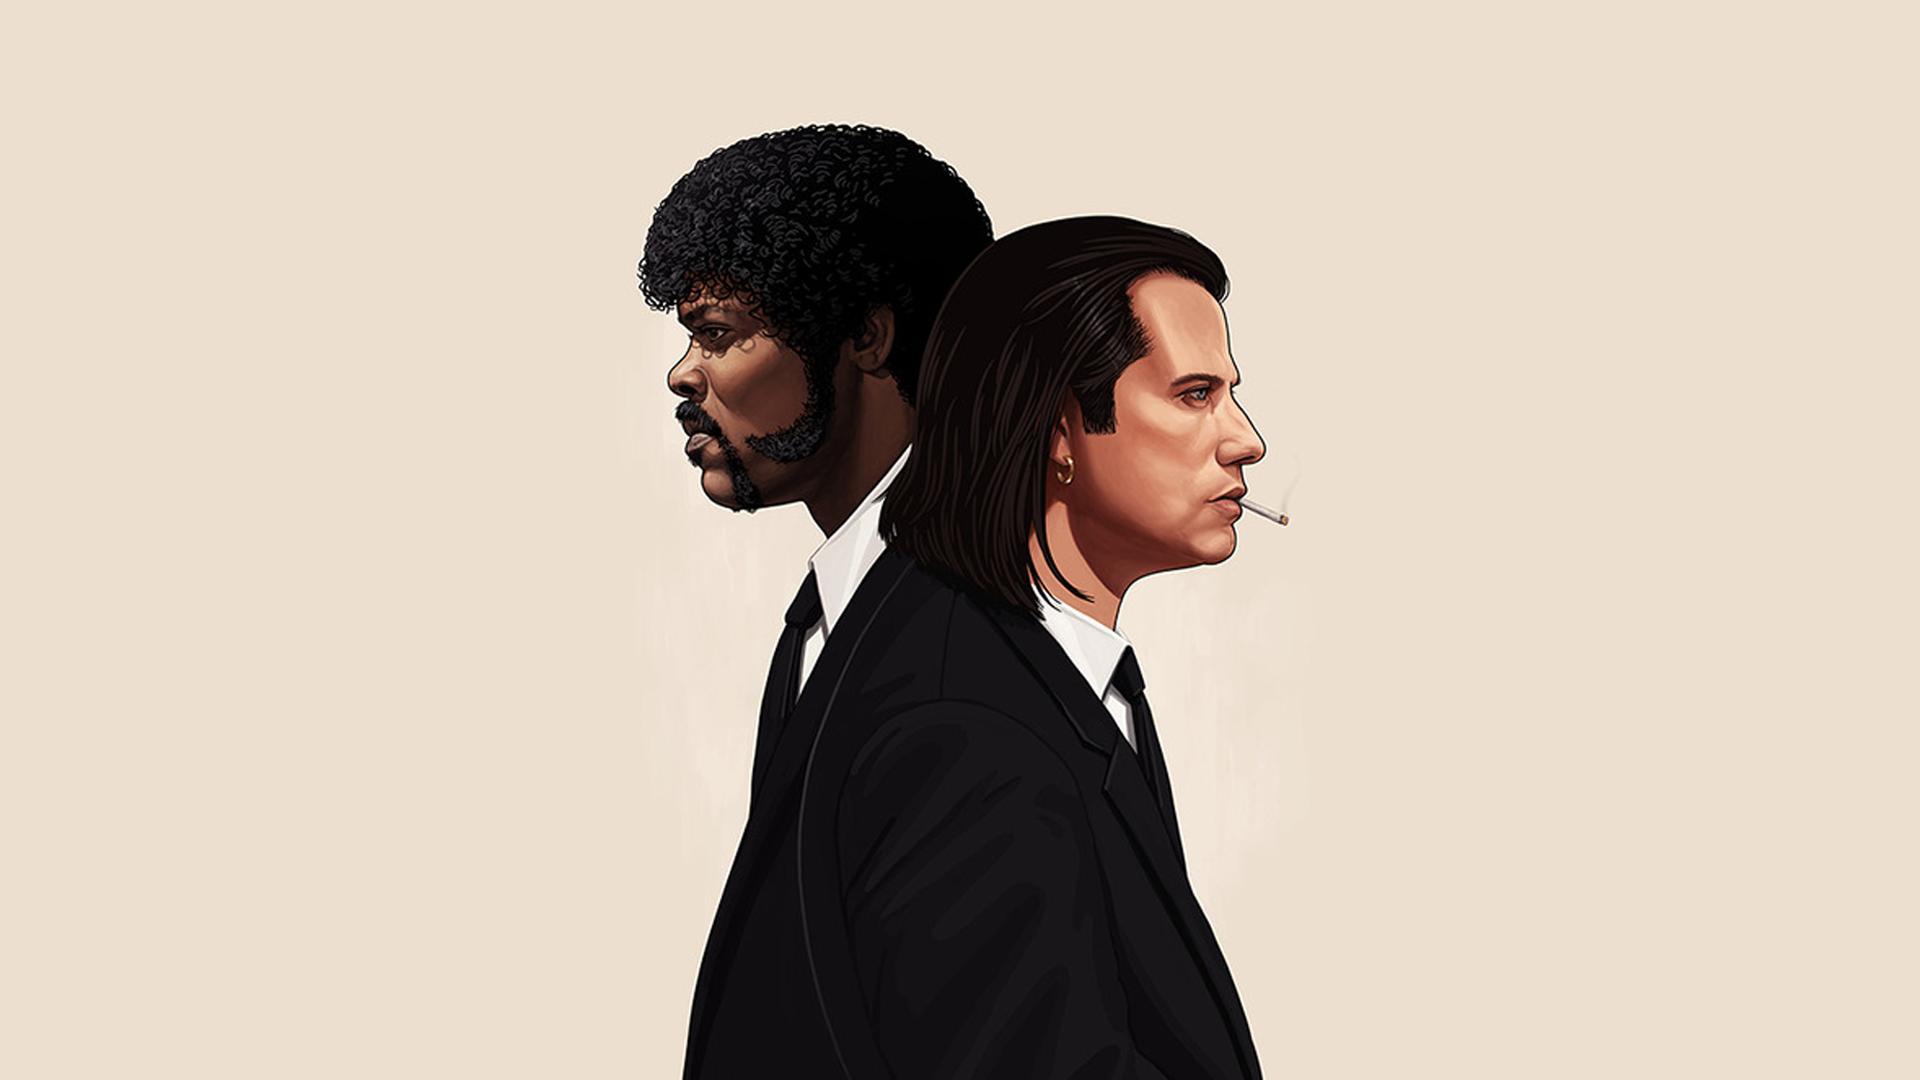 Removed the text from the classic Pulp Fiction Poster and made a mobile  wallpaper  riphonewallpapers